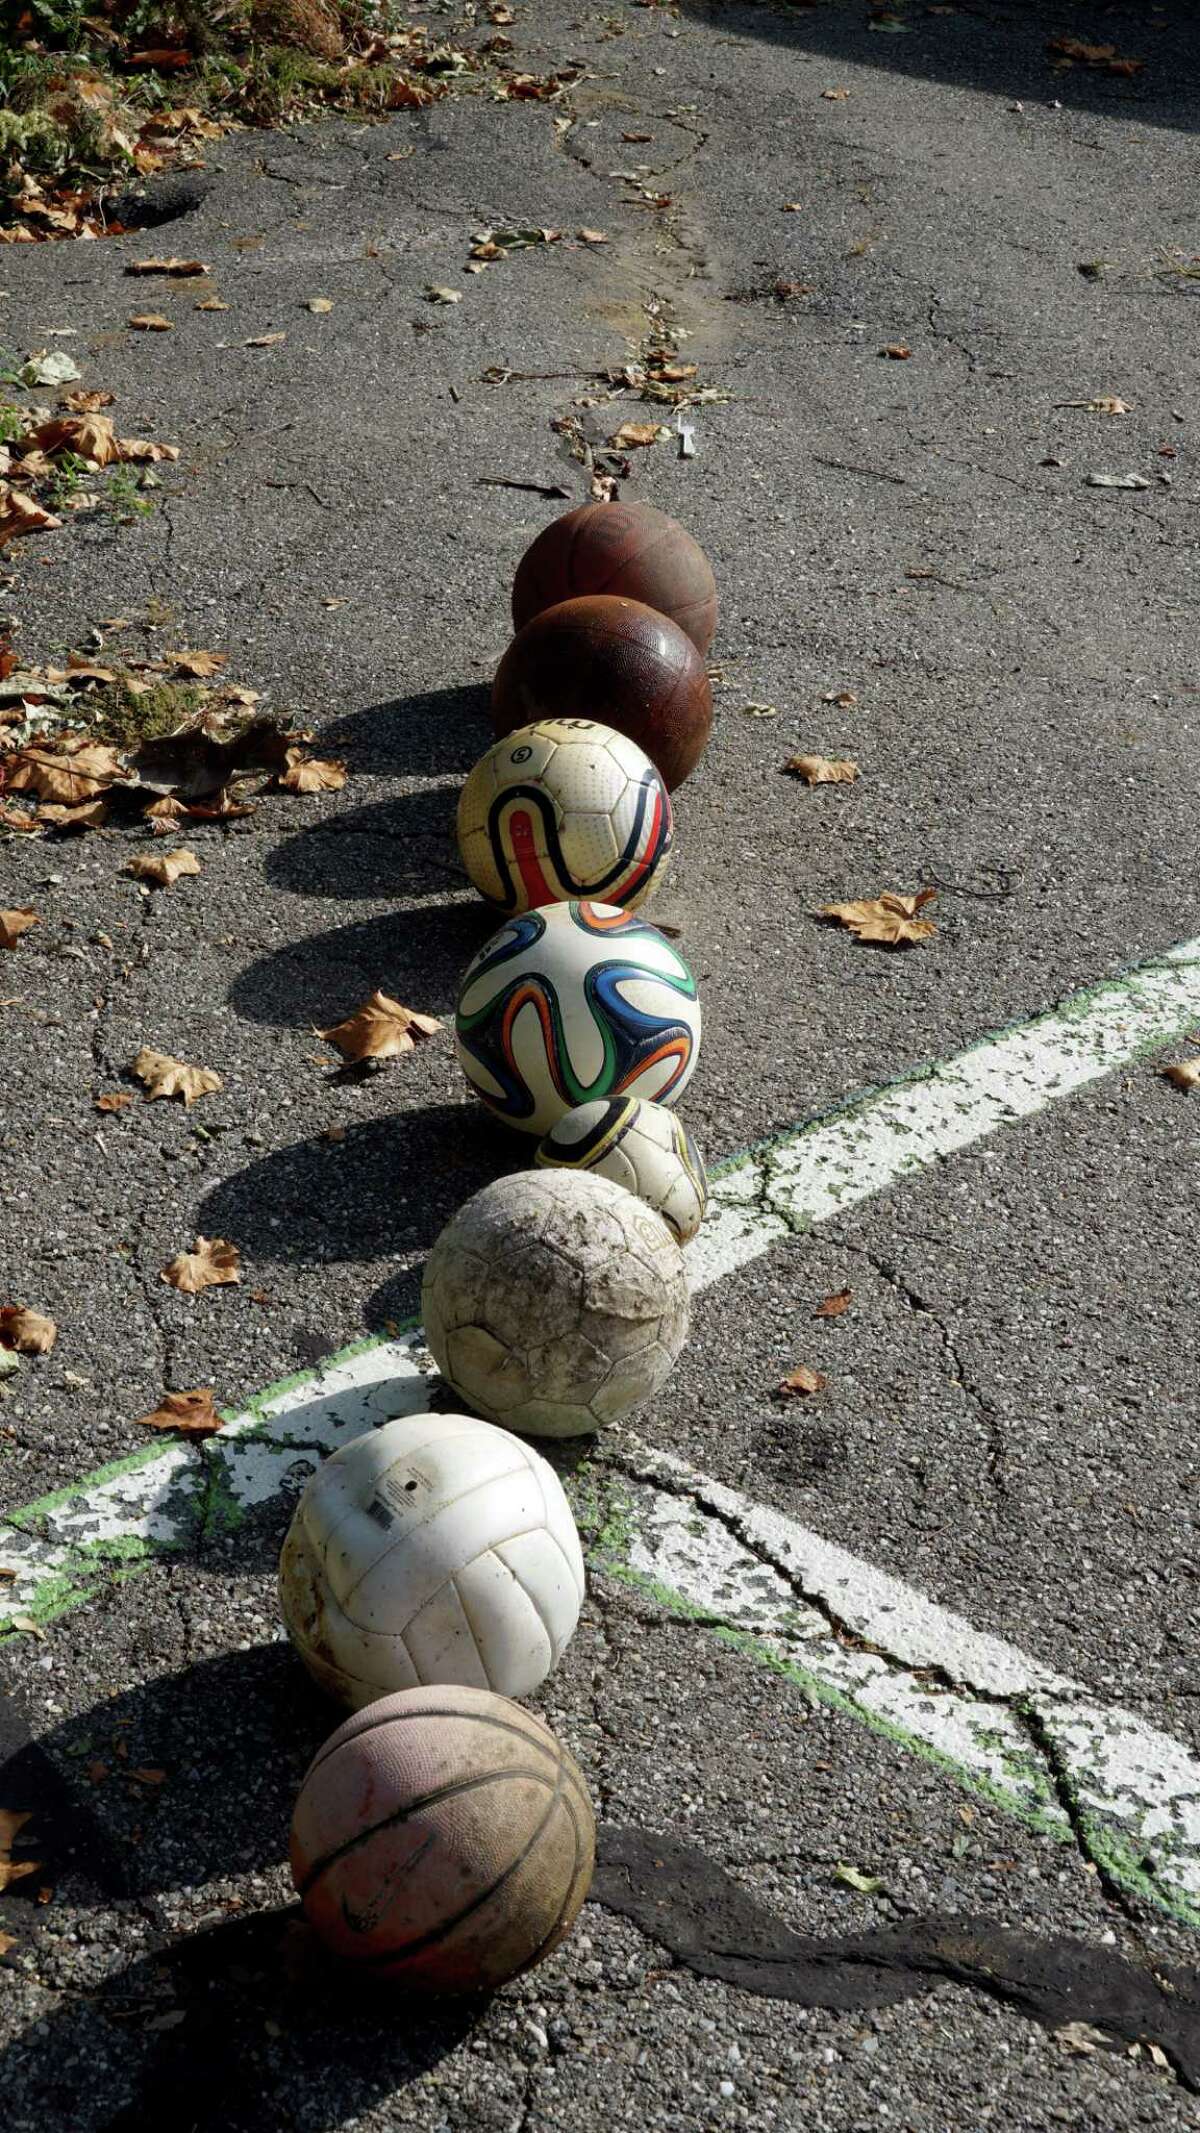 A number of balls were recovered from the Still River Trail during the cleanup.